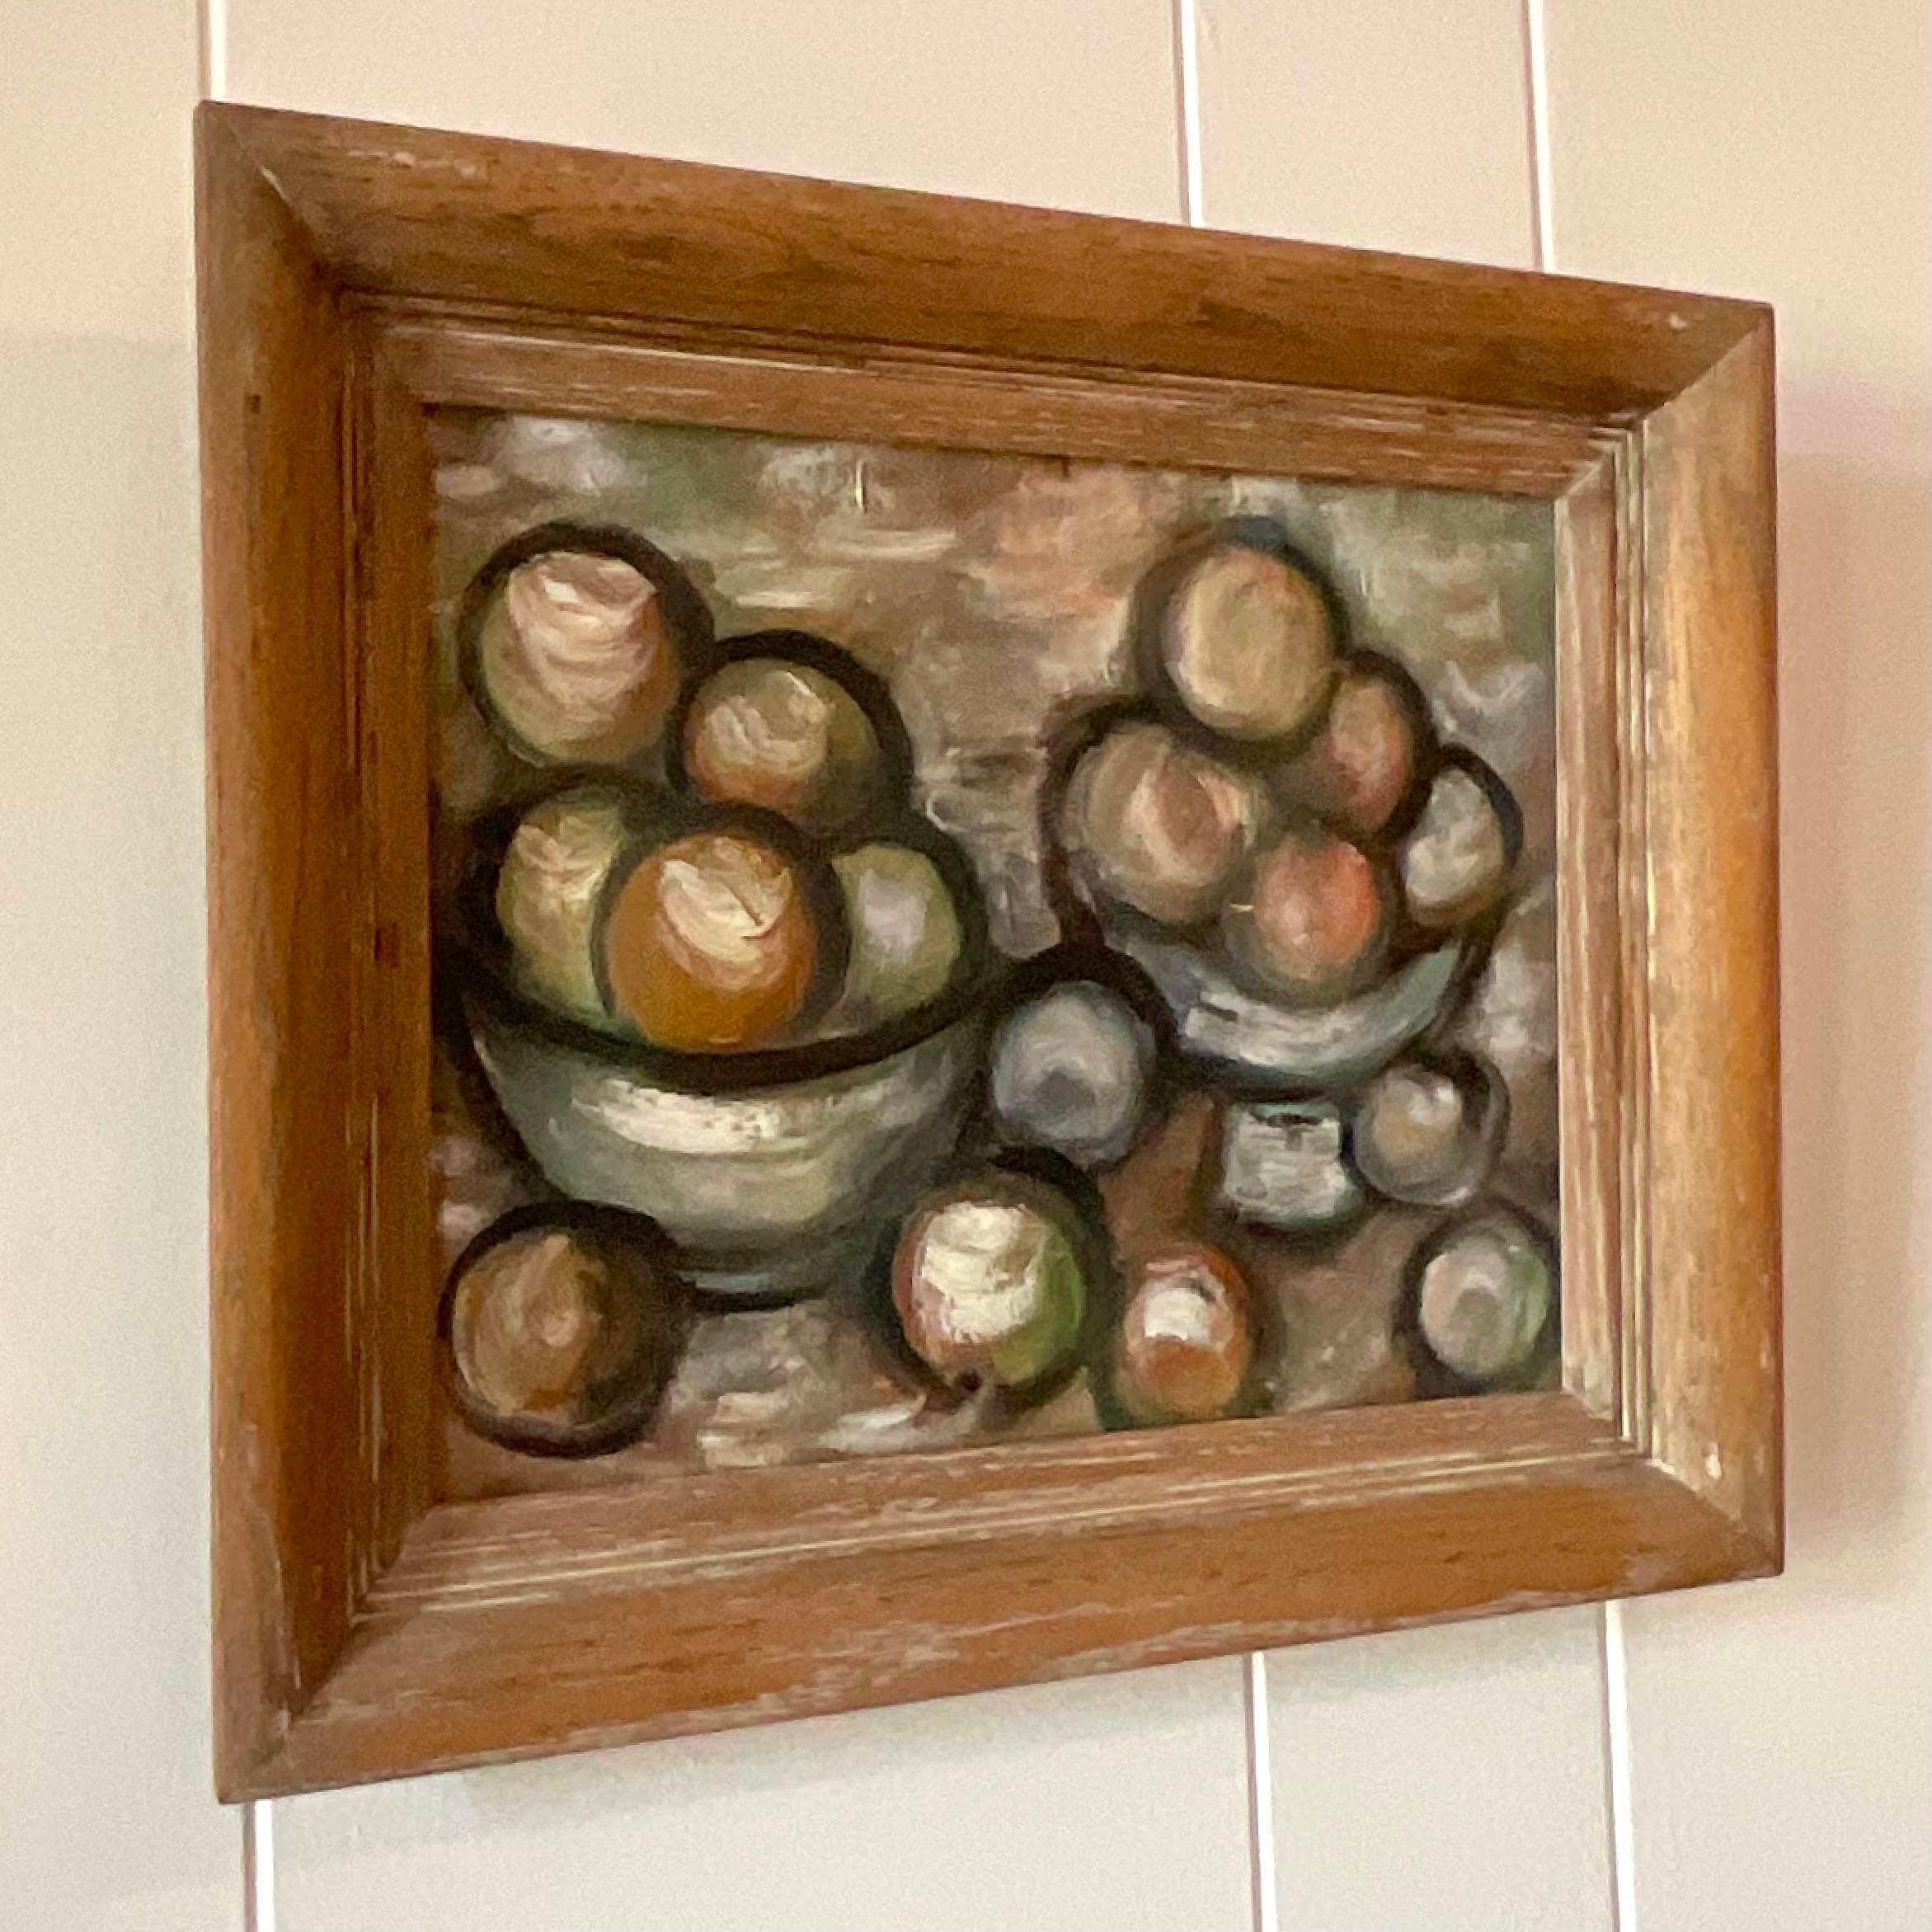 A fabulous vintage Boho signed original oil on board. A beautiful Abstract Expressionist Still life of two bowls of fruit. An homage to Paul Cezanne with traditional black outlines. Done in 1958 and signed by the artist. Acquired from a Miami estate